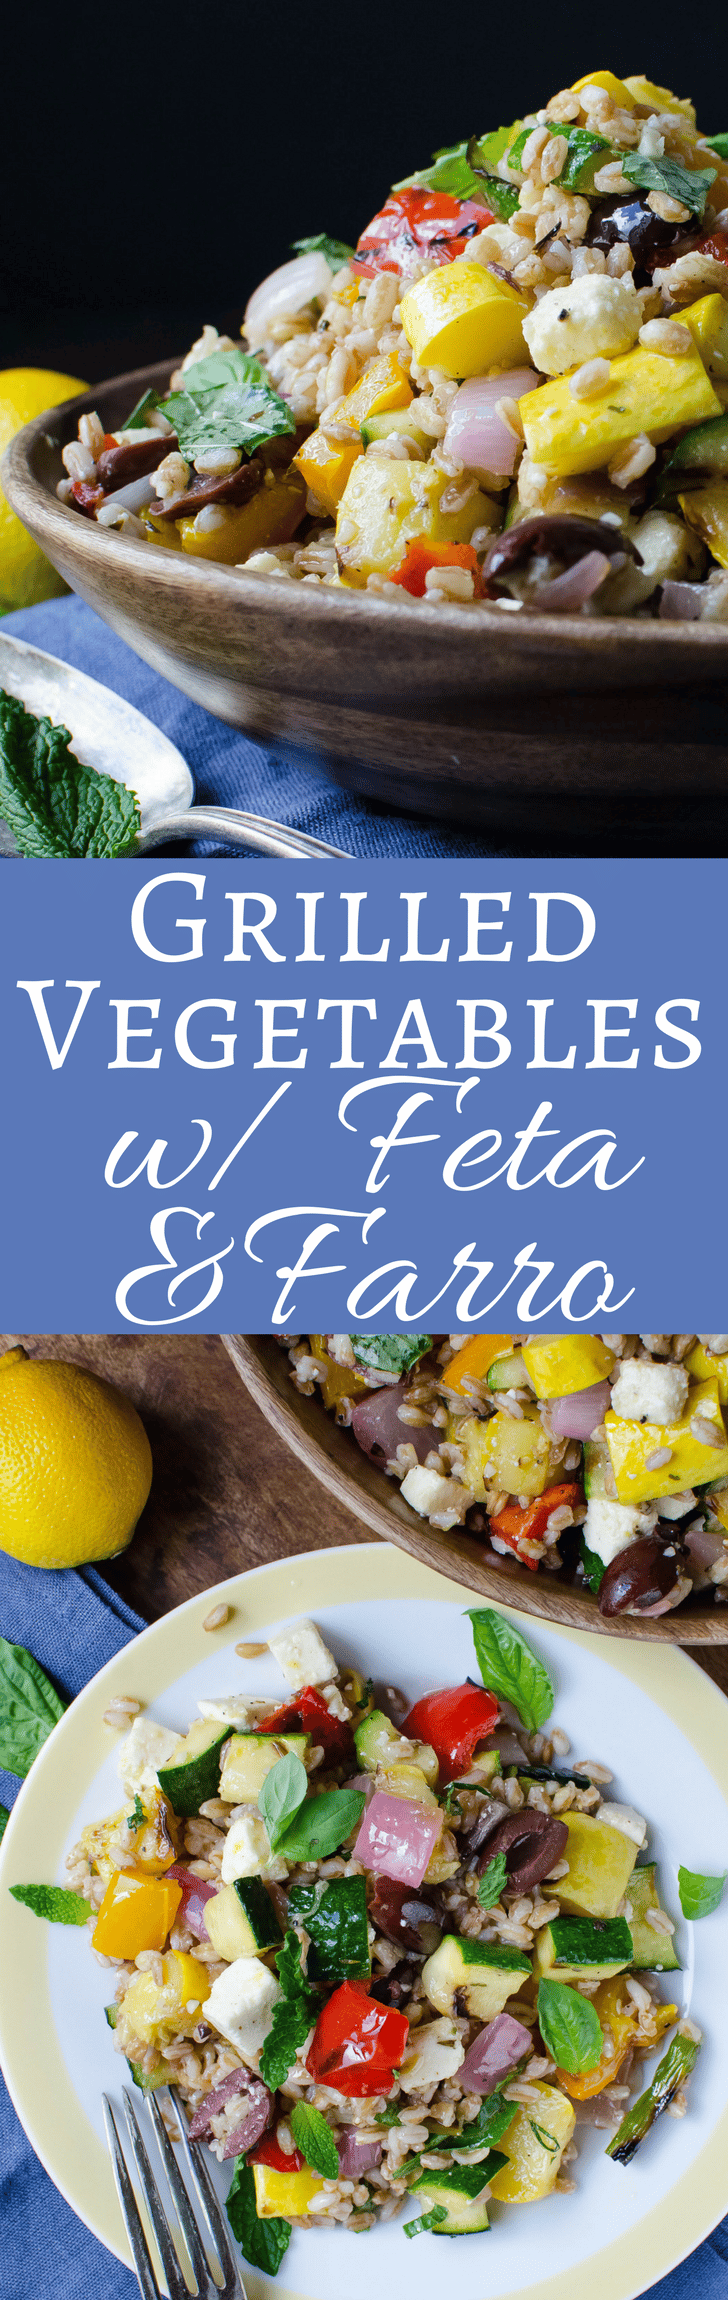 This easy recipe for Grilled Vegetables with Feta and Farro is a tasty & delicious summery side dish or vegetarian main. Great for picnics & brown-bagging!